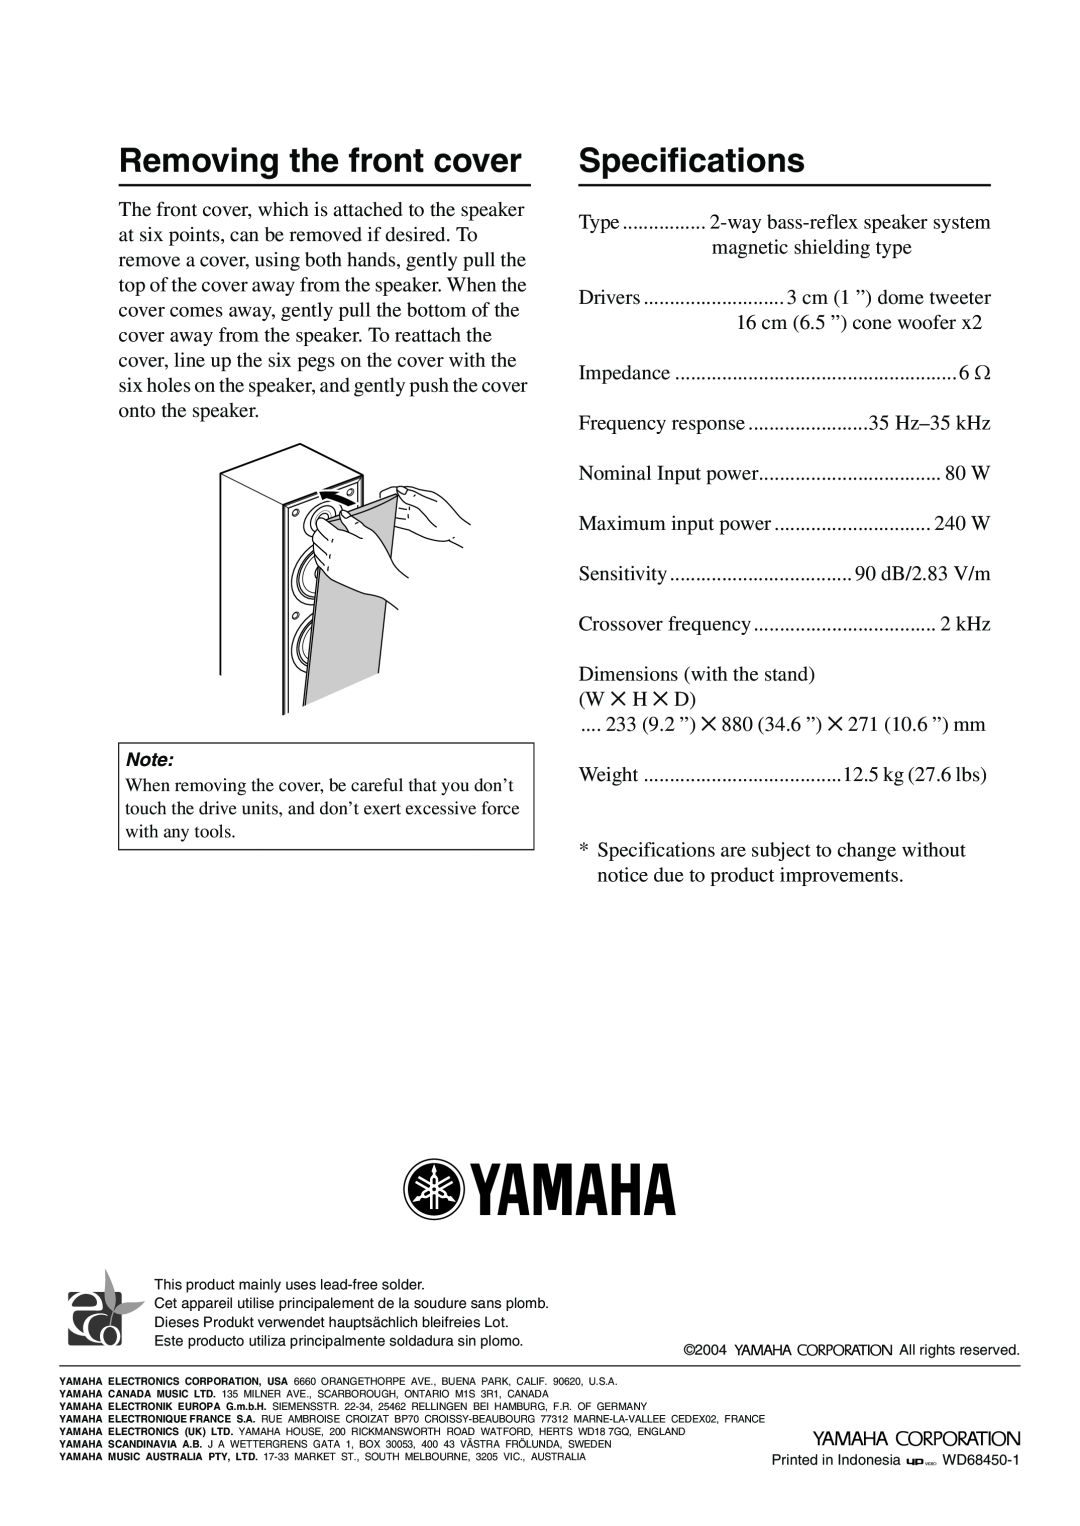 Yamaha HTR-5940 AV owner manual Removing the front cover, Specifications 